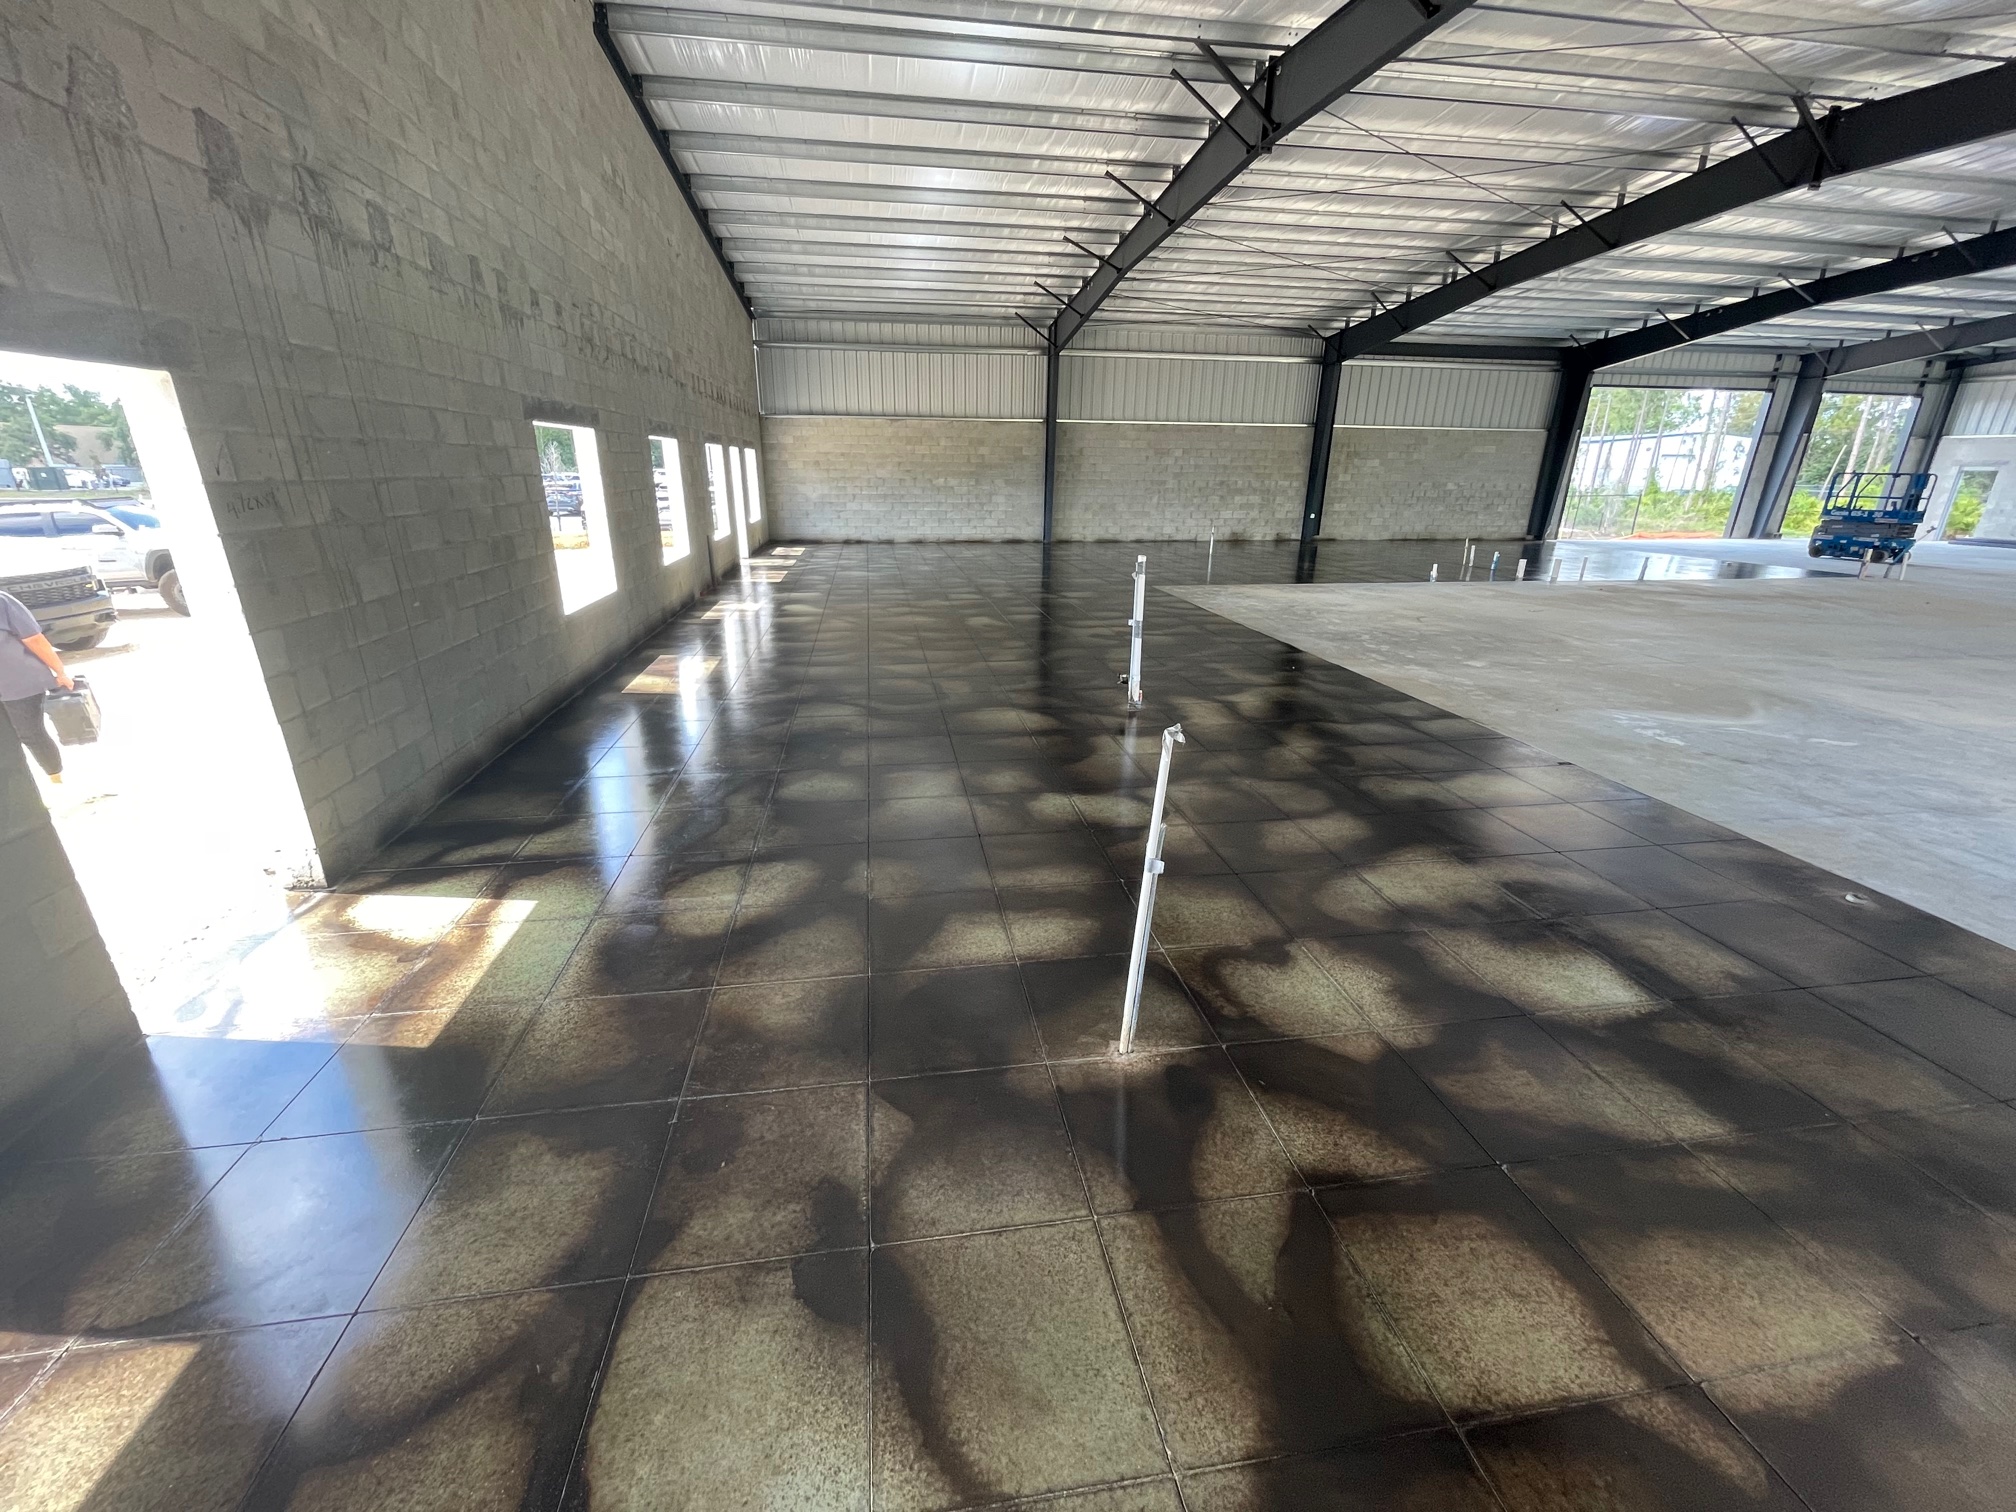 Photo of a finished concrete floor, with a glossy and polished surface, showcasing the final outcome of the acid staining process.